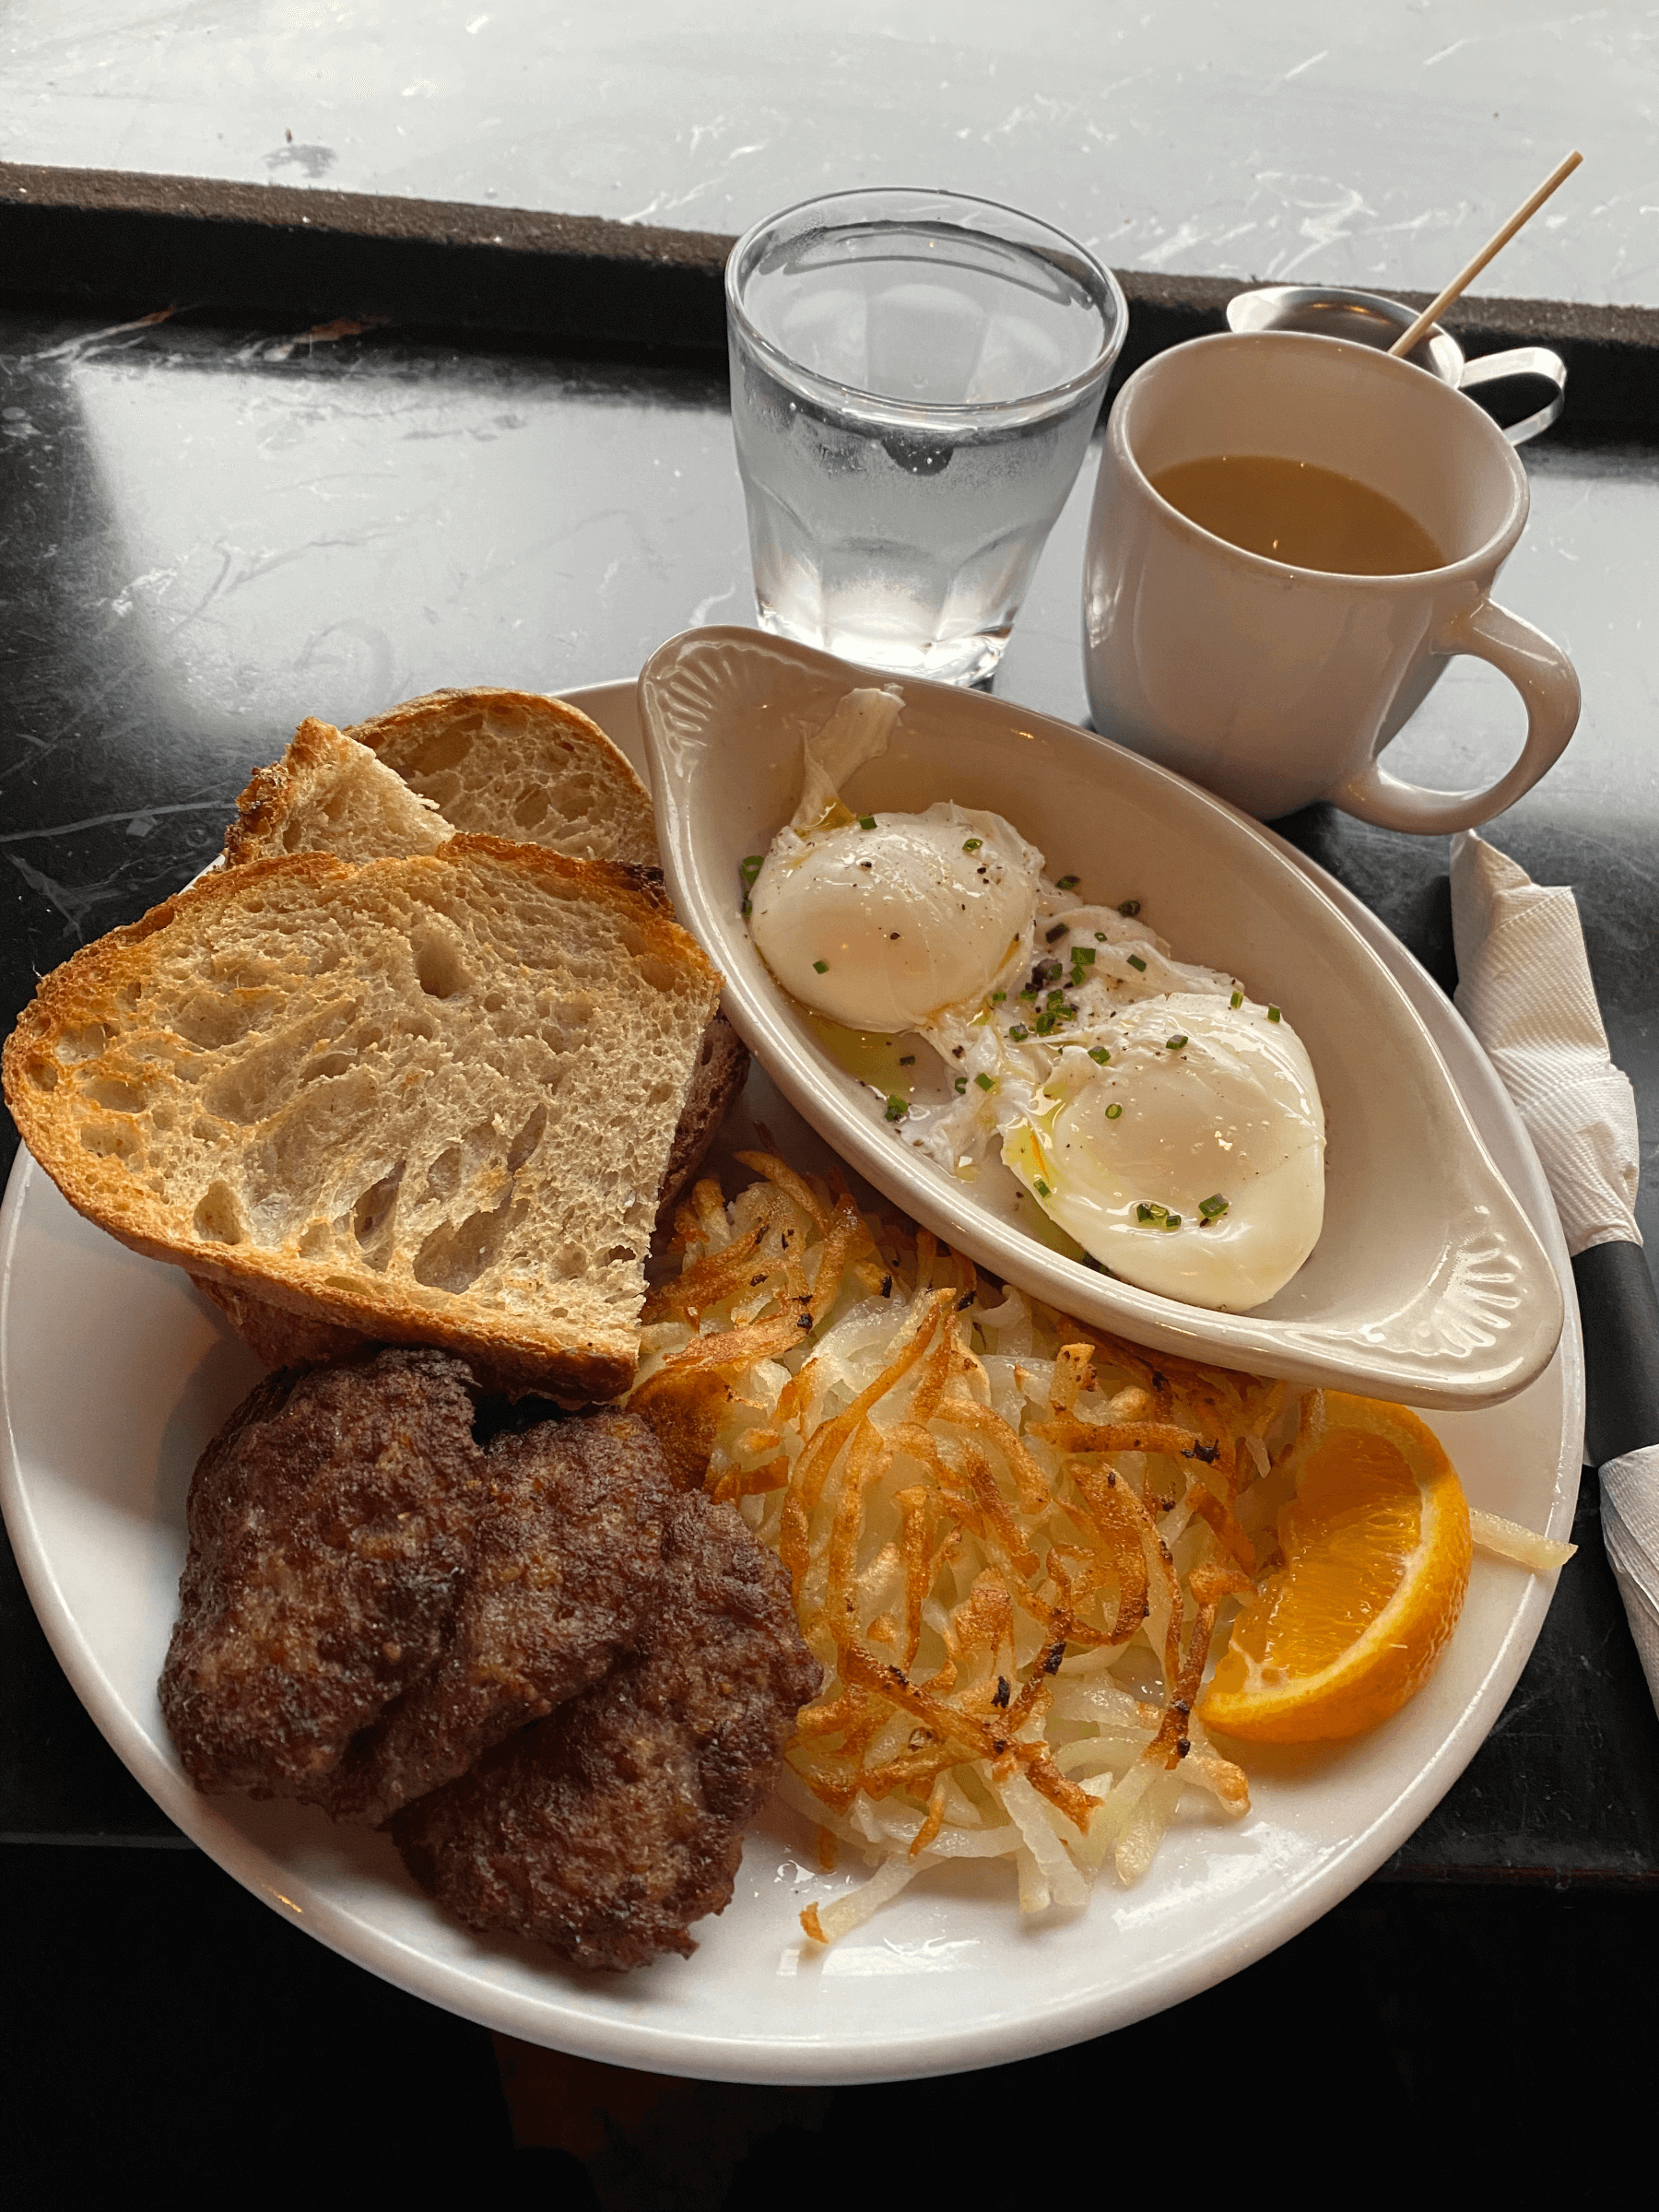 Saddle Creek Standard Breakfast with poached eggs and meat patties